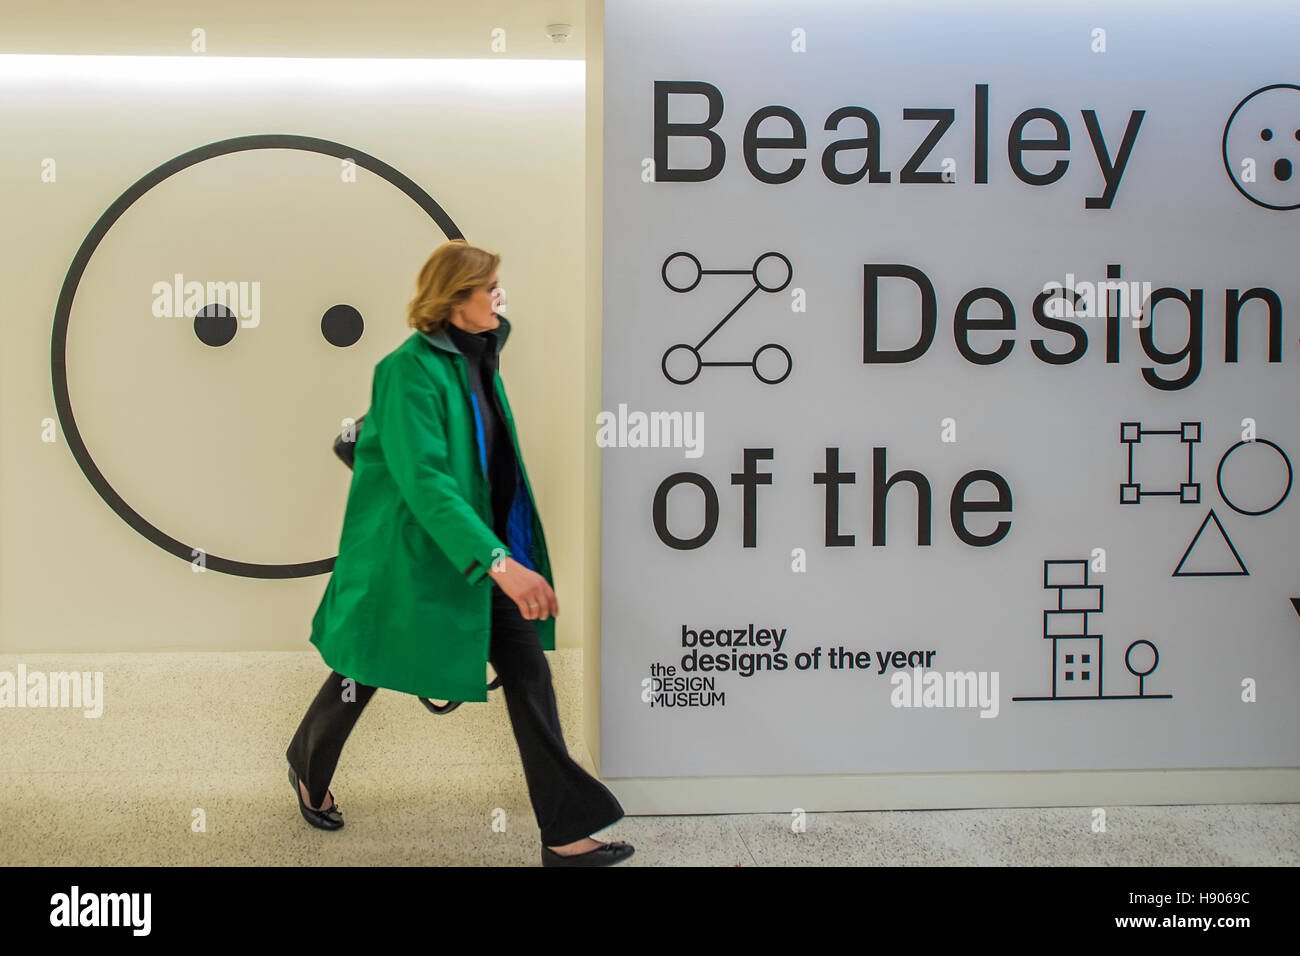 Kensington, London, UK. 17th November, 2016. The Beazley Desins area - The Design Museum has moved to Kensington High Street from its former home as an established London landmark on the banks of the river Thames. The new museum will be devoted to contemporary design and architecture, an international showcase for the many design skills at which Britain excels and a creative centre, promoting innovation and nurturing the next generation of design talent. Credit:  Guy Bell/Alamy Live News Stock Photo